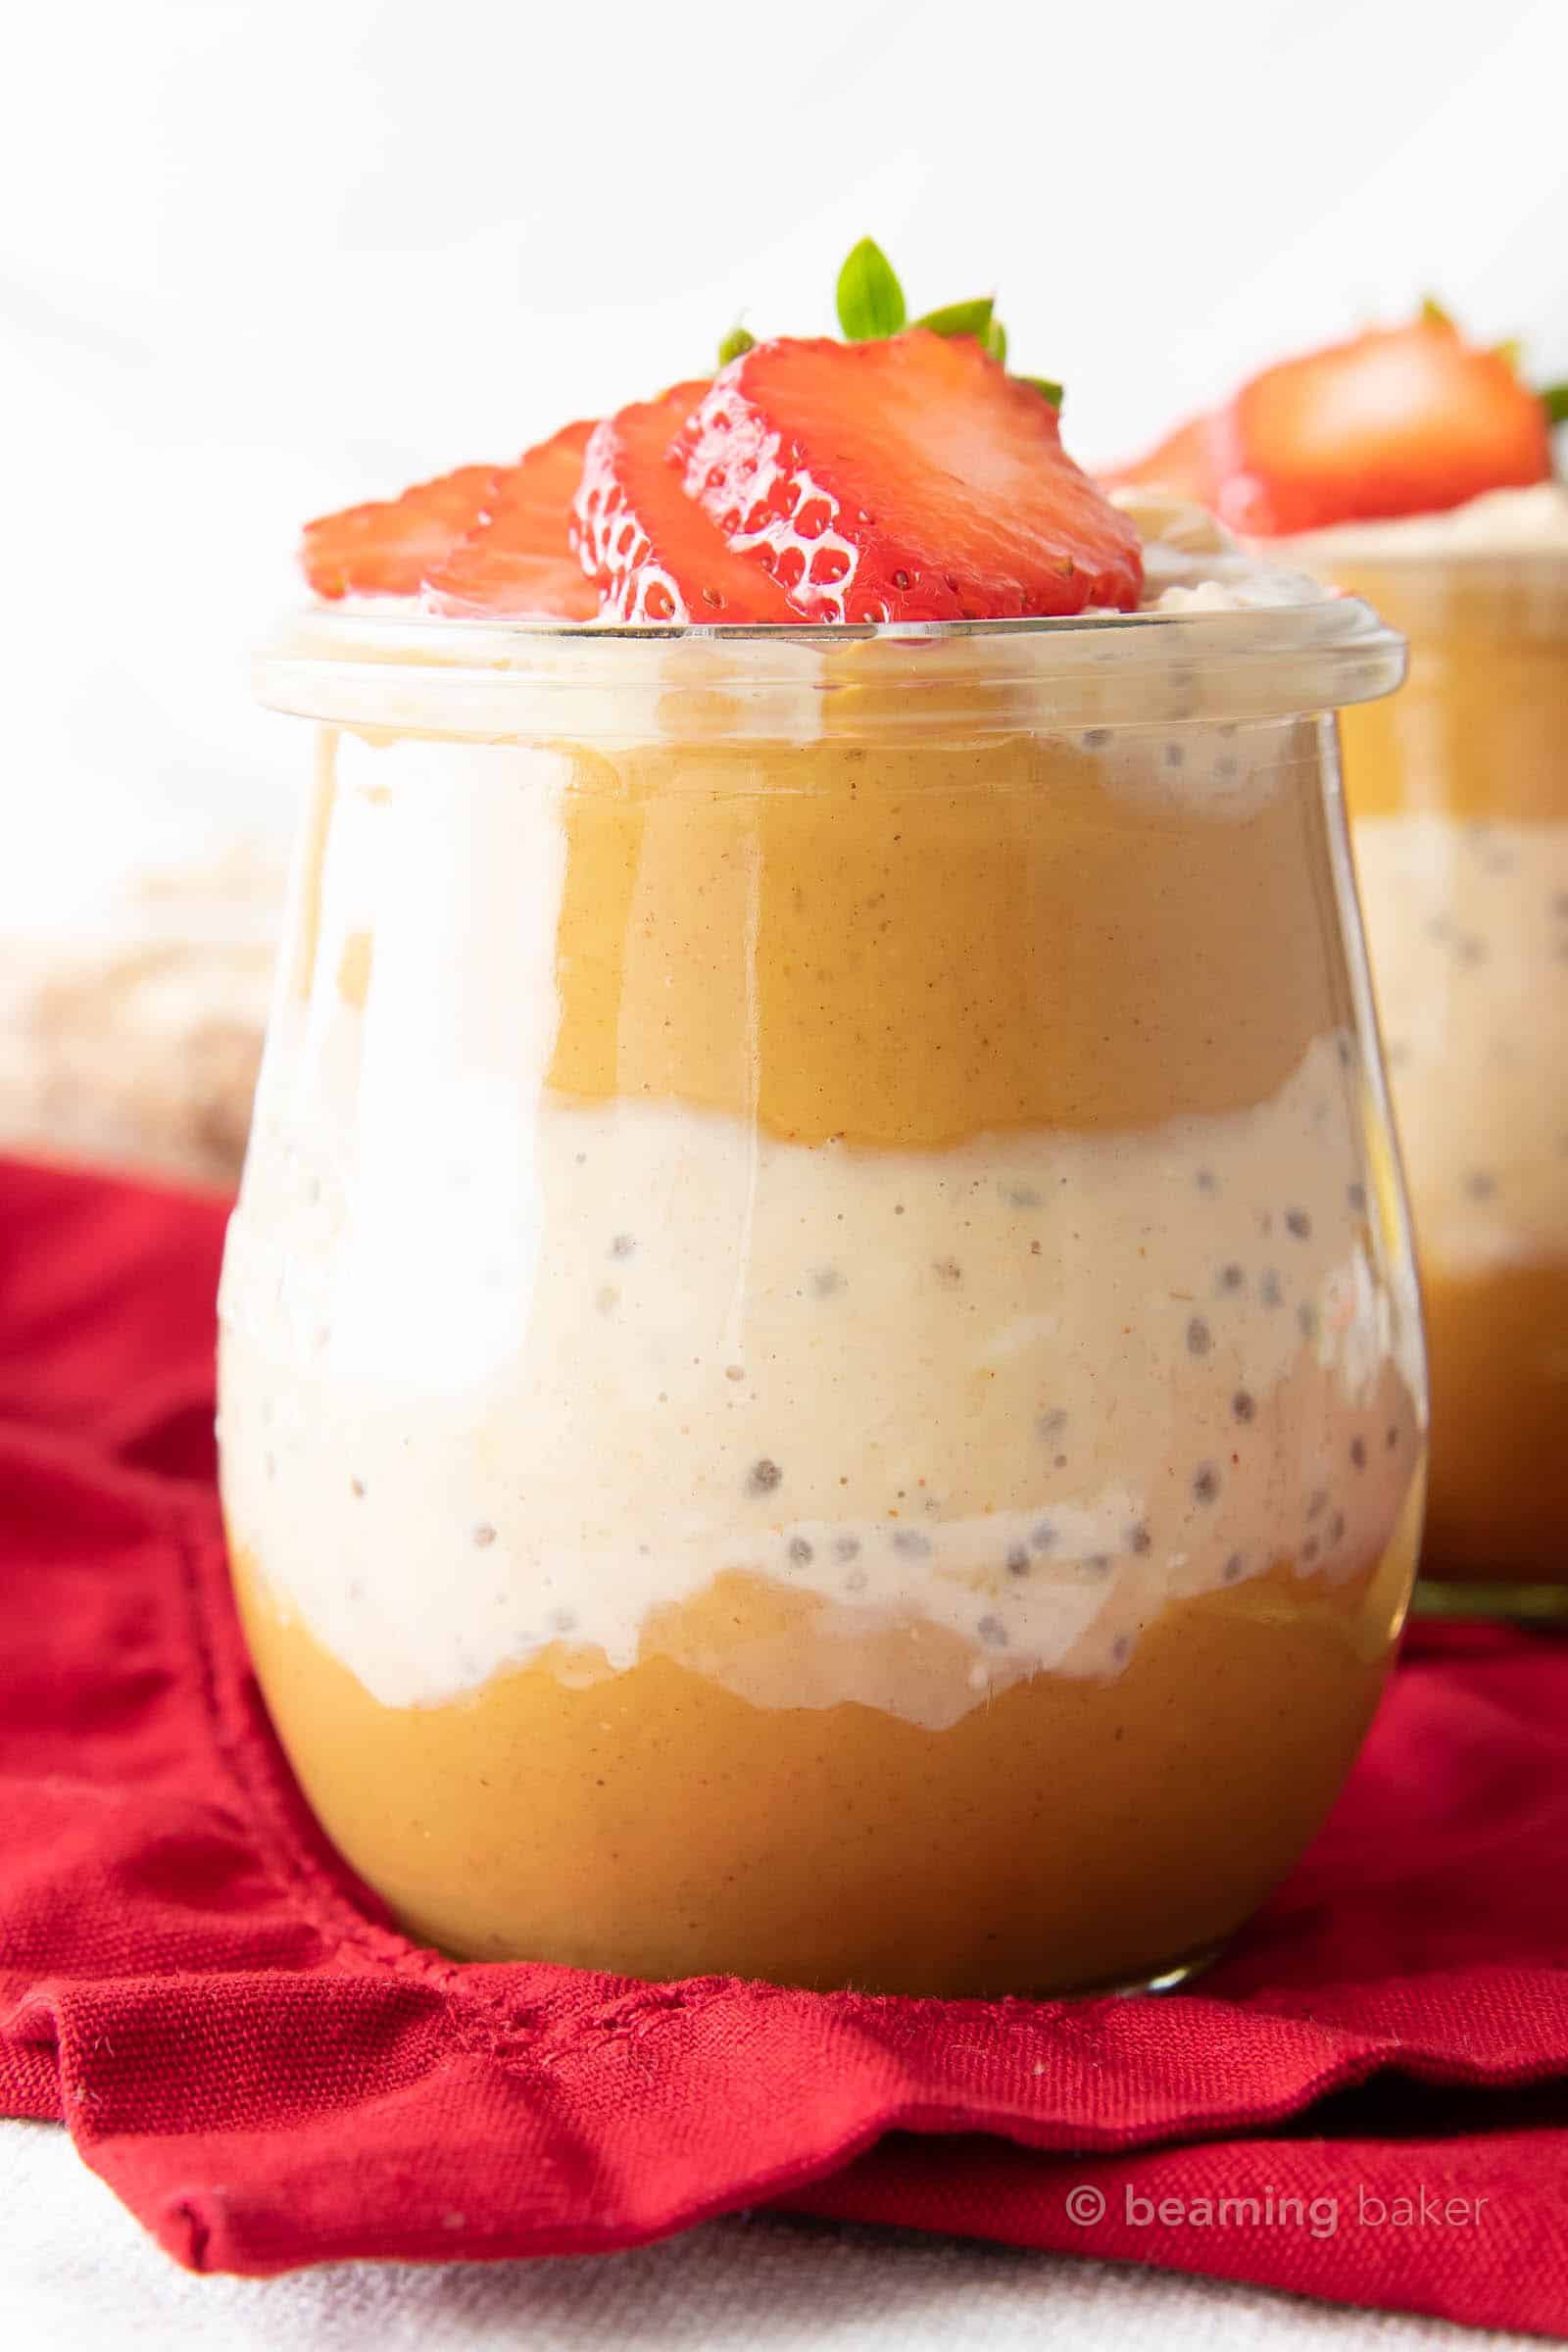 Super closeup shot of peanut butter overnight oats layered with peanut butter and topped with strawberries